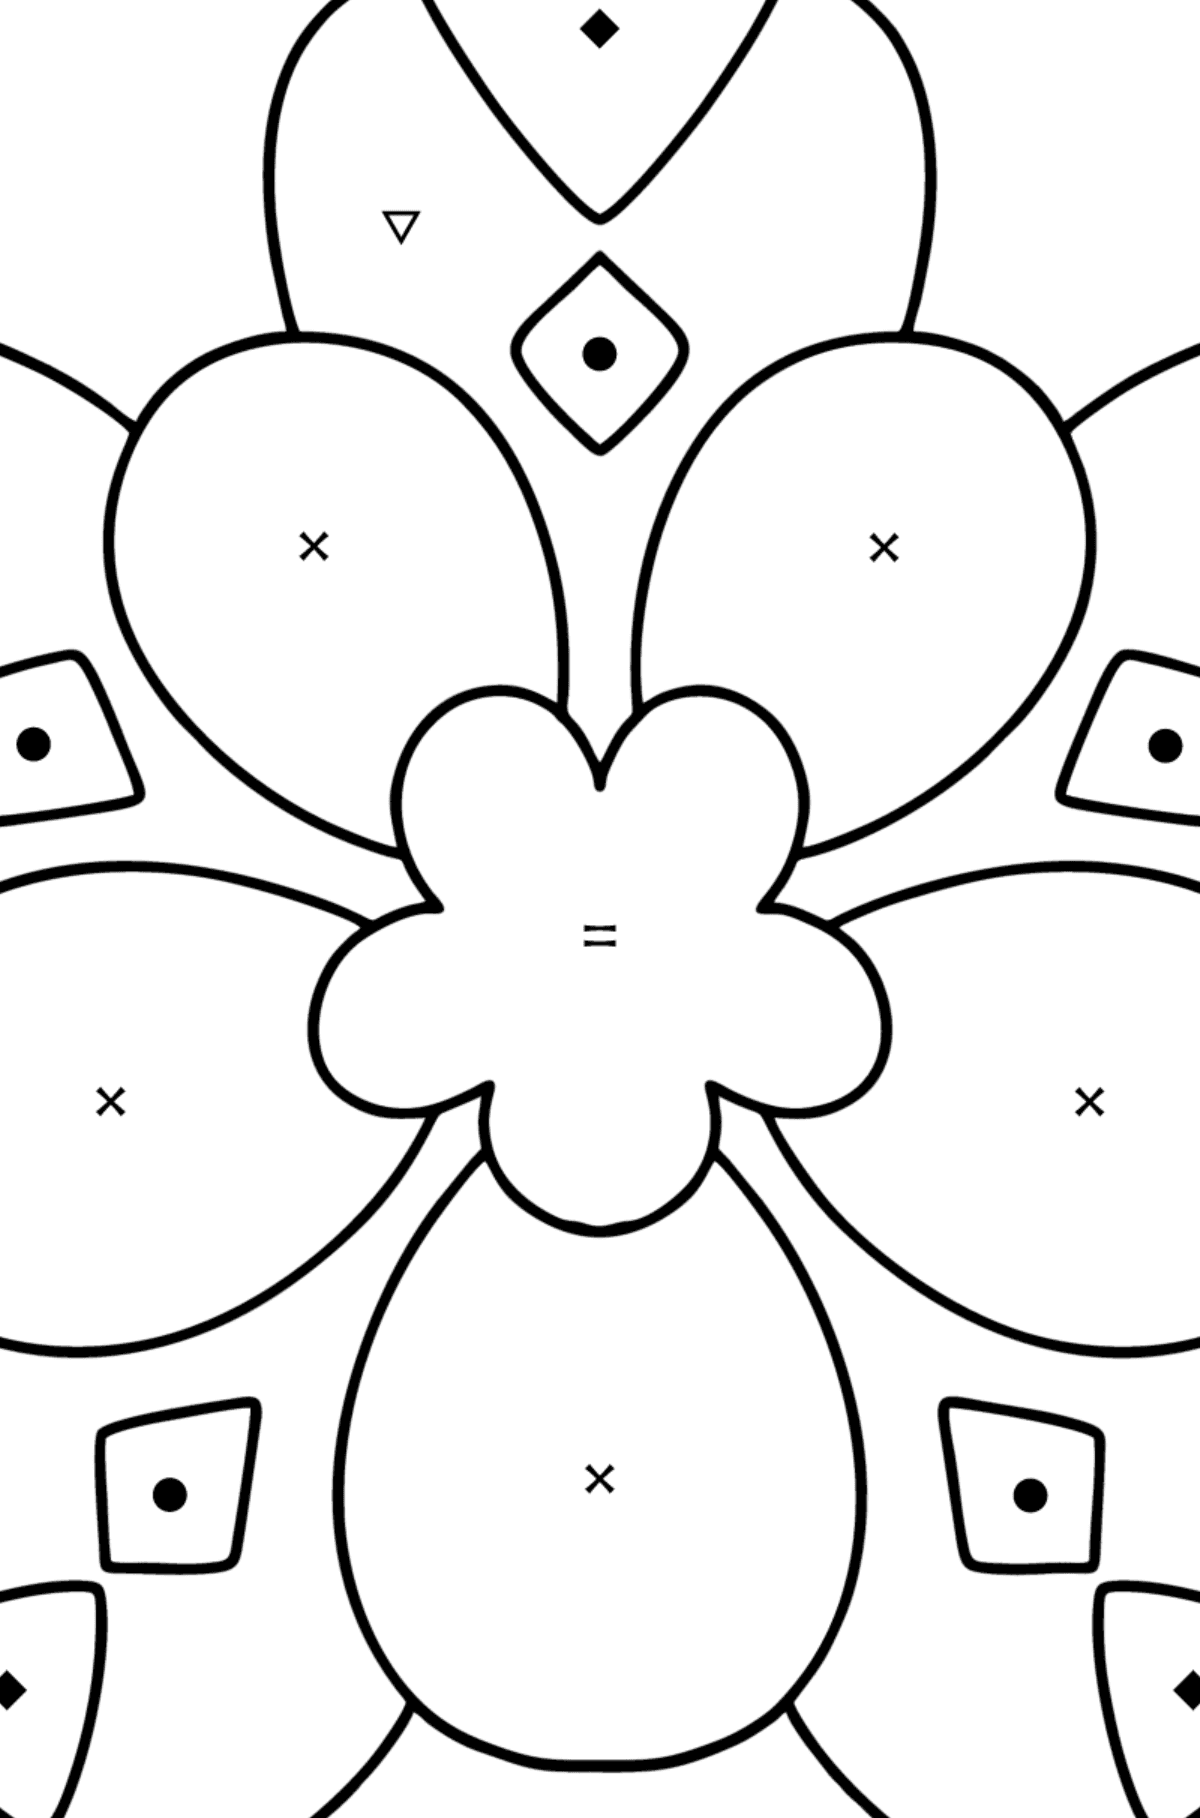 Anti stress Heart coloring page - Coloring by Symbols for Kids